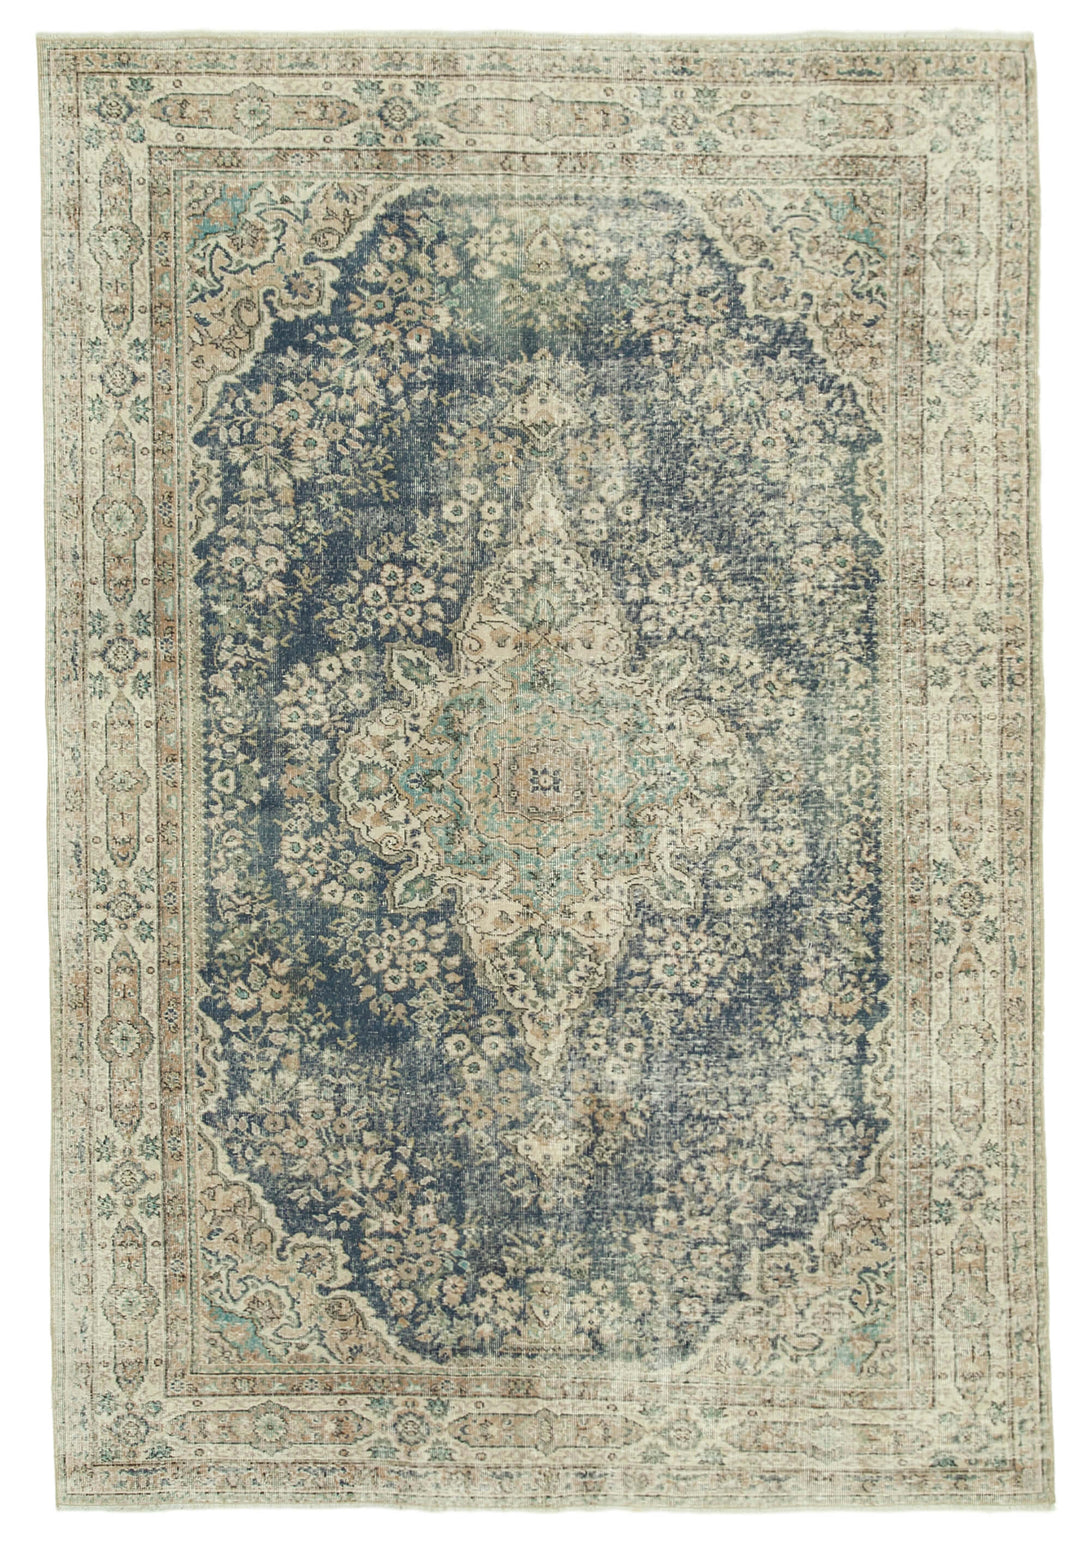 Handmade White Wash Area Rug > Design# OL-AC-36829 > Size: 6'-11" x 10'-3", Carpet Culture Rugs, Handmade Rugs, NYC Rugs, New Rugs, Shop Rugs, Rug Store, Outlet Rugs, SoHo Rugs, Rugs in USA